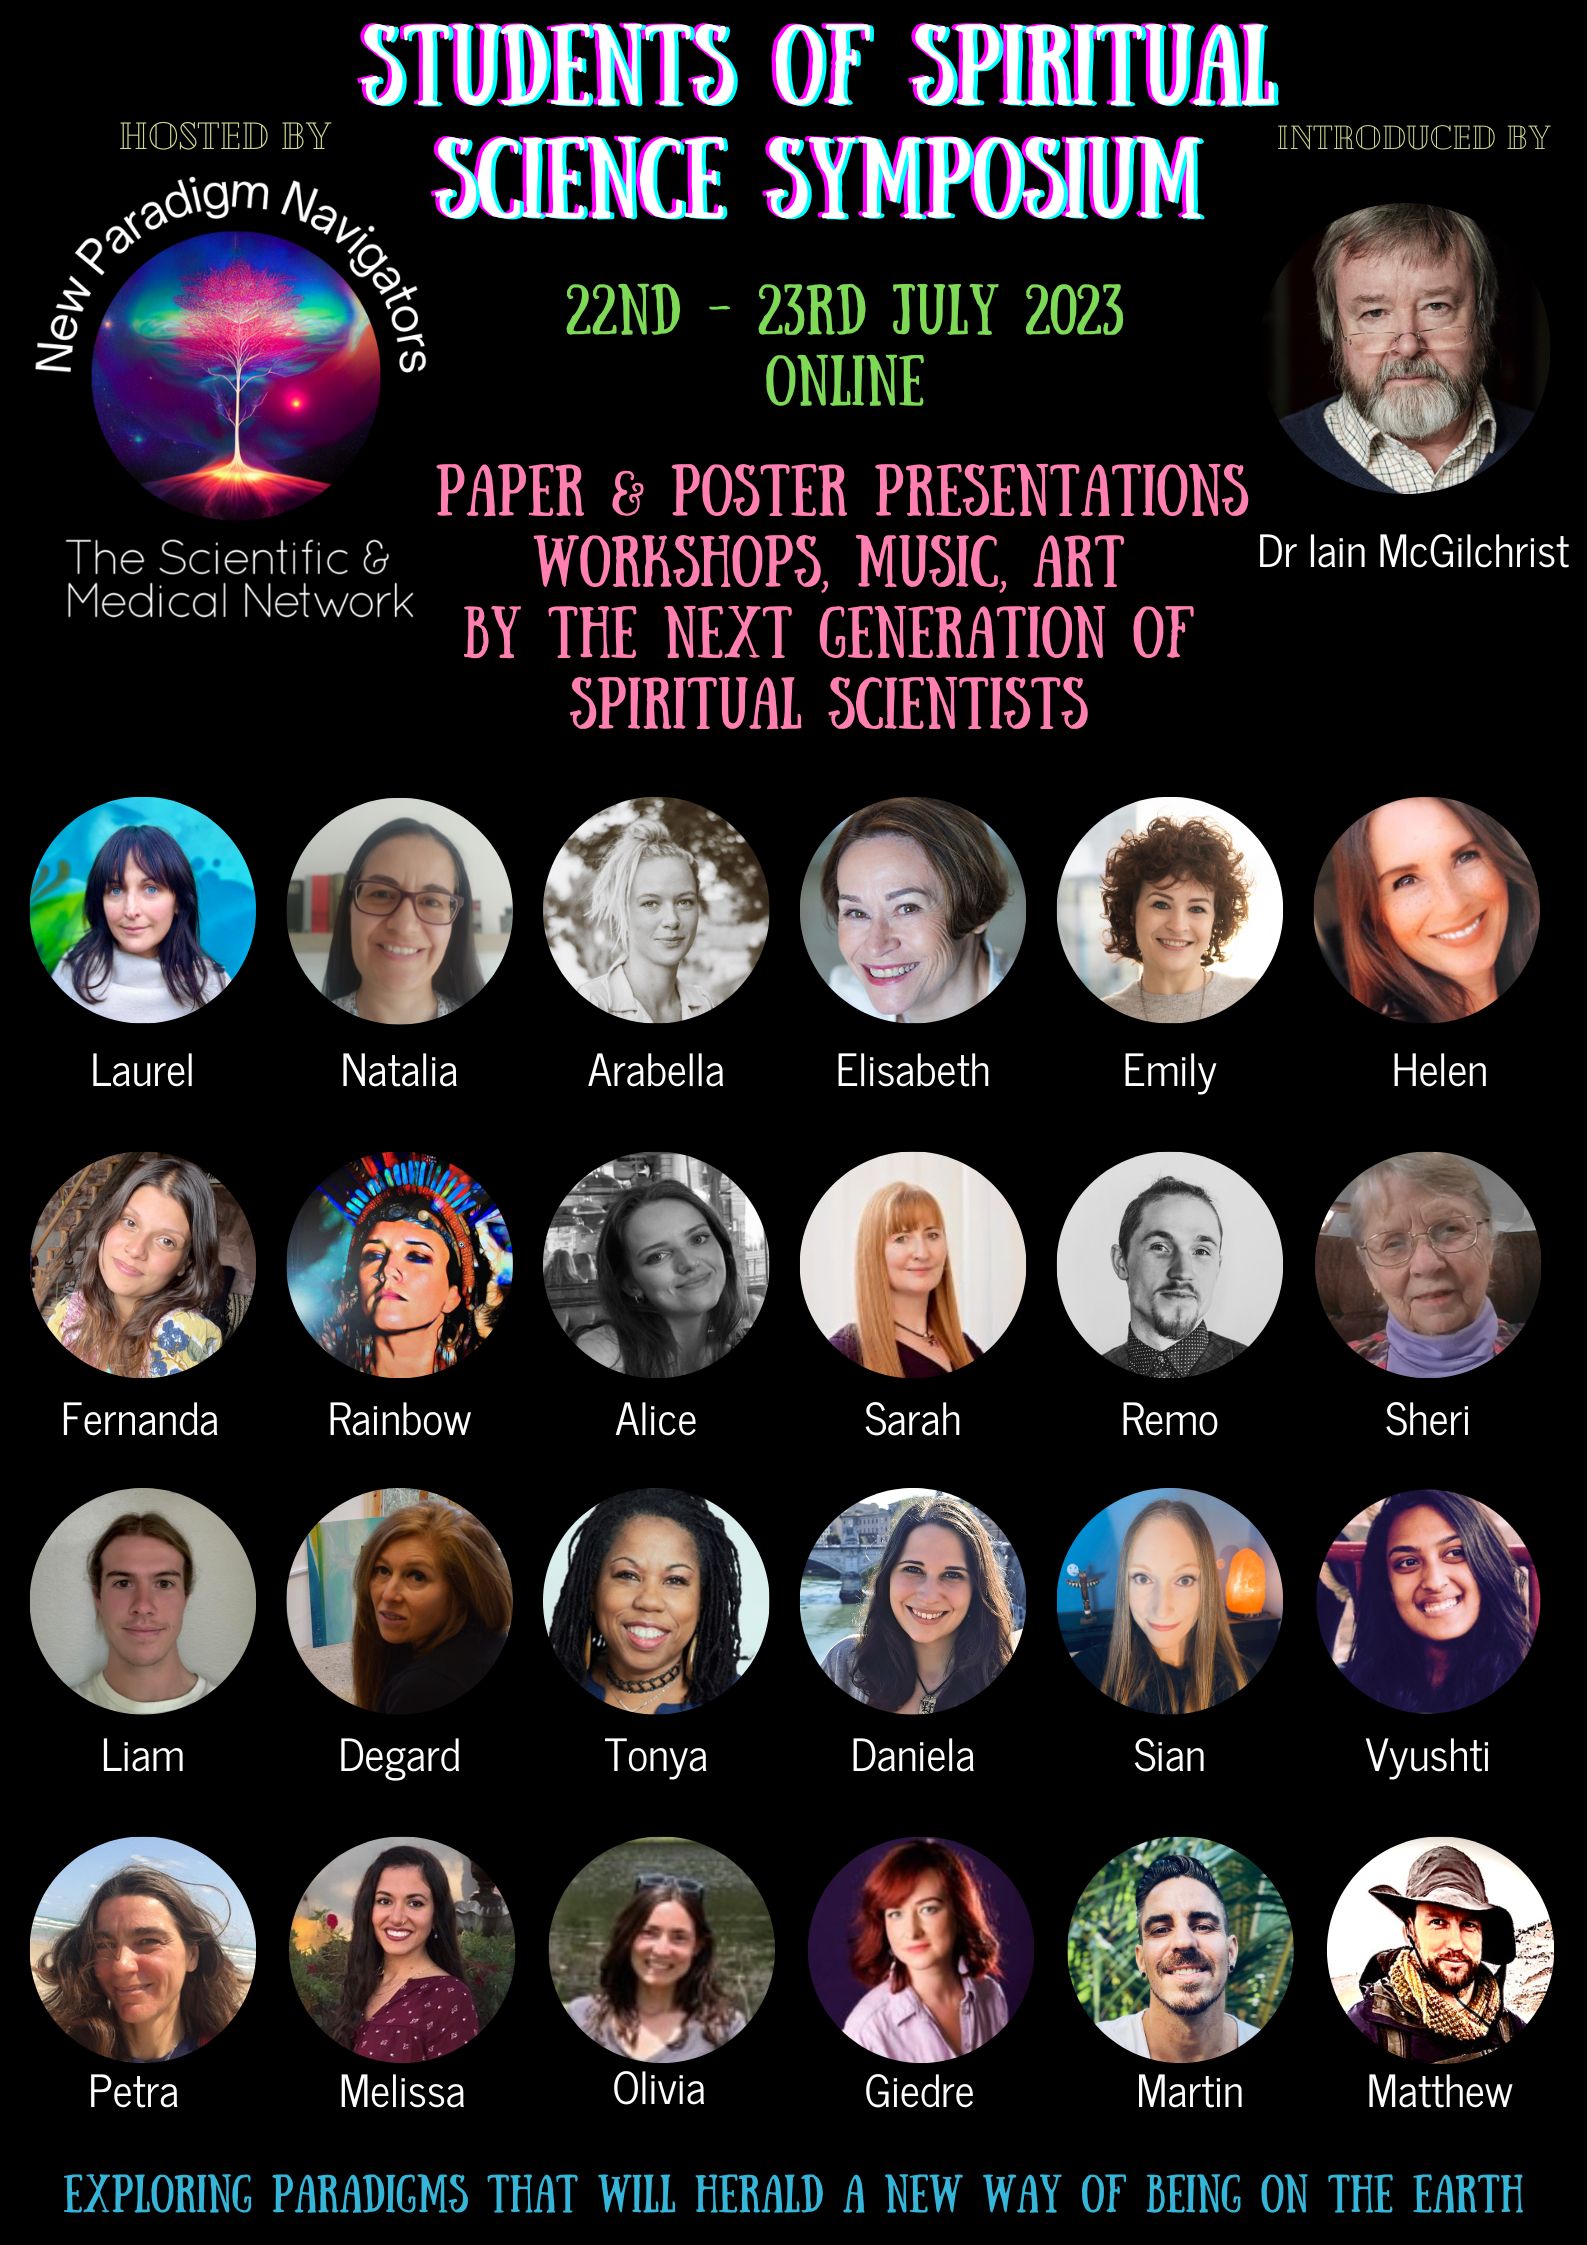 Students of Spiritual Science Symposium 2023 Poster